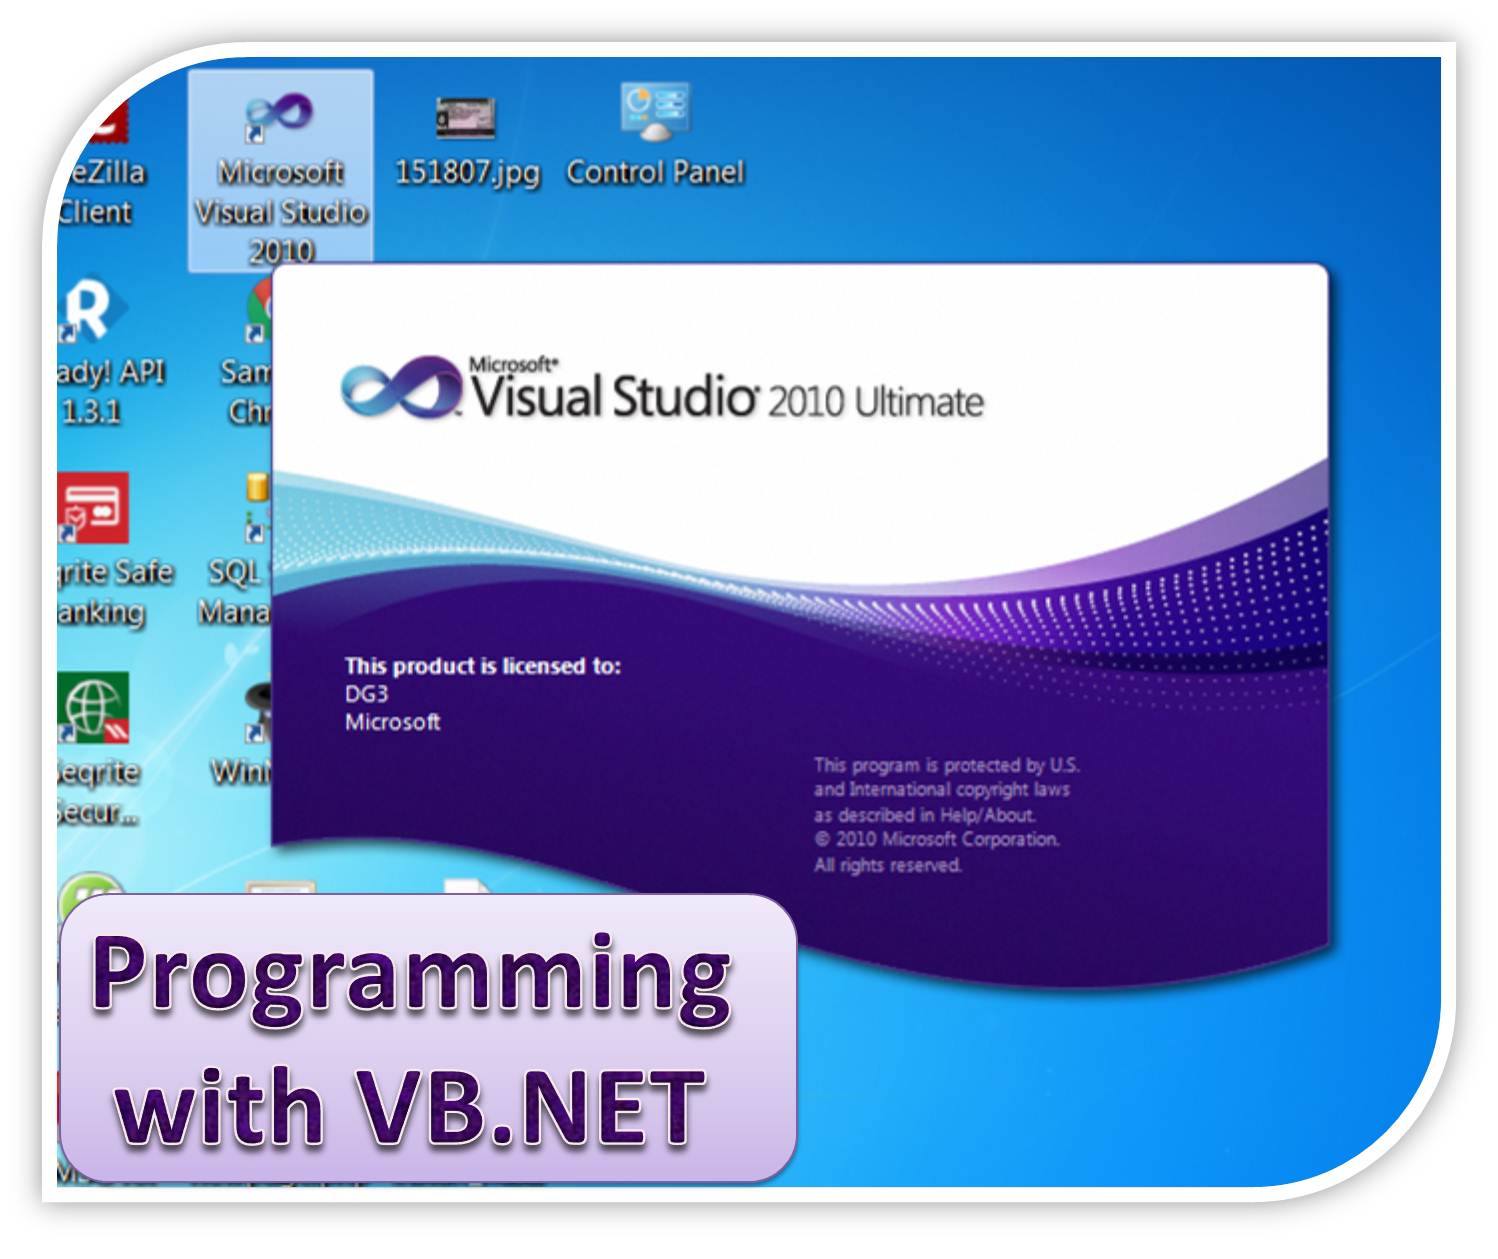 http://study.aisectonline.com/images/Programming with Visual Basic dot net.jpg